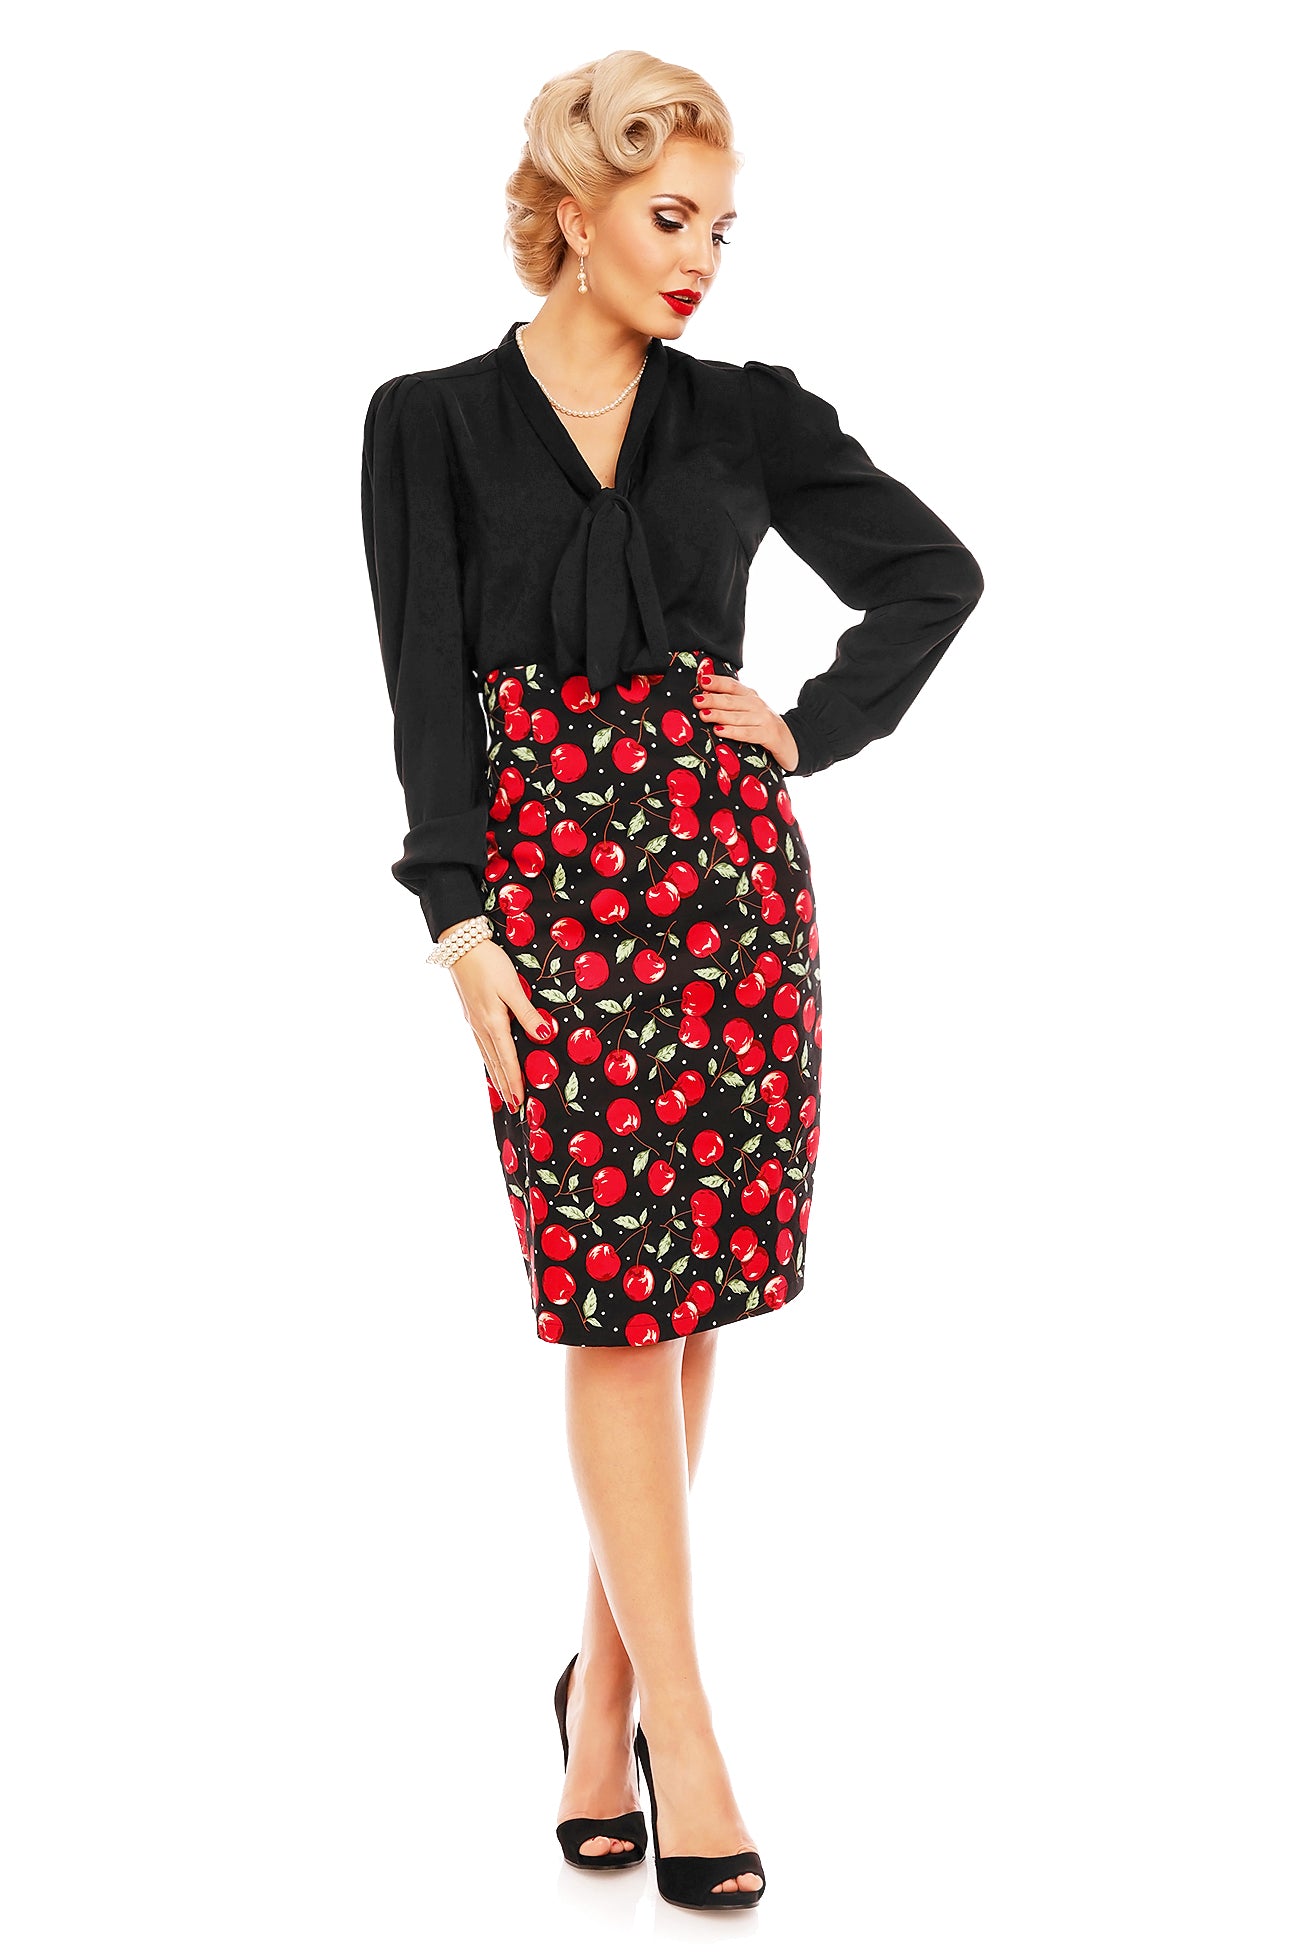 Model wears a cherry print falda pencil skirt, with cape and black top, front view